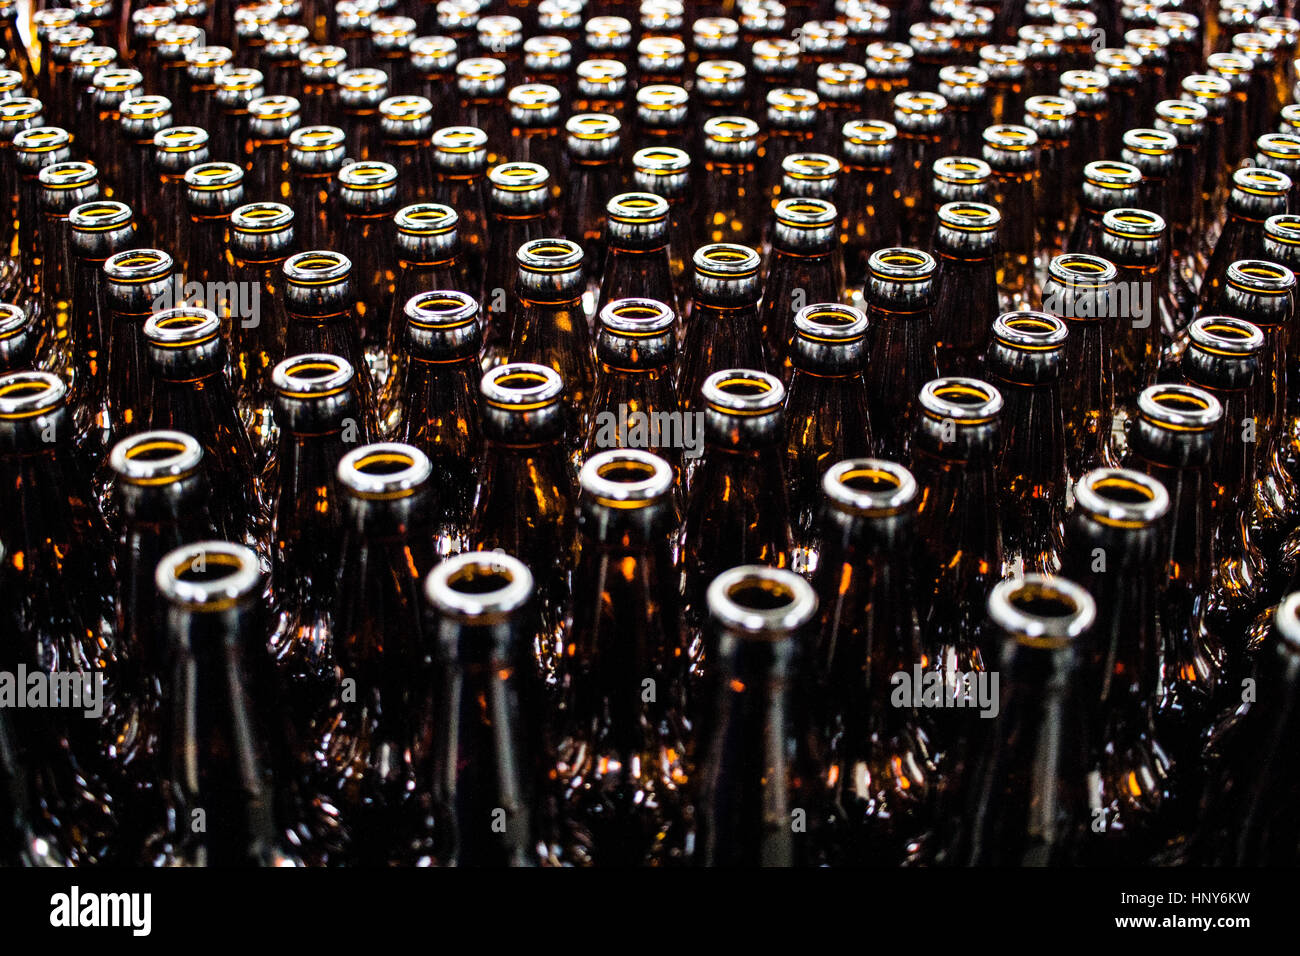 Empty beer bottles nearly arranged and waiting to be filled. Stock Photo